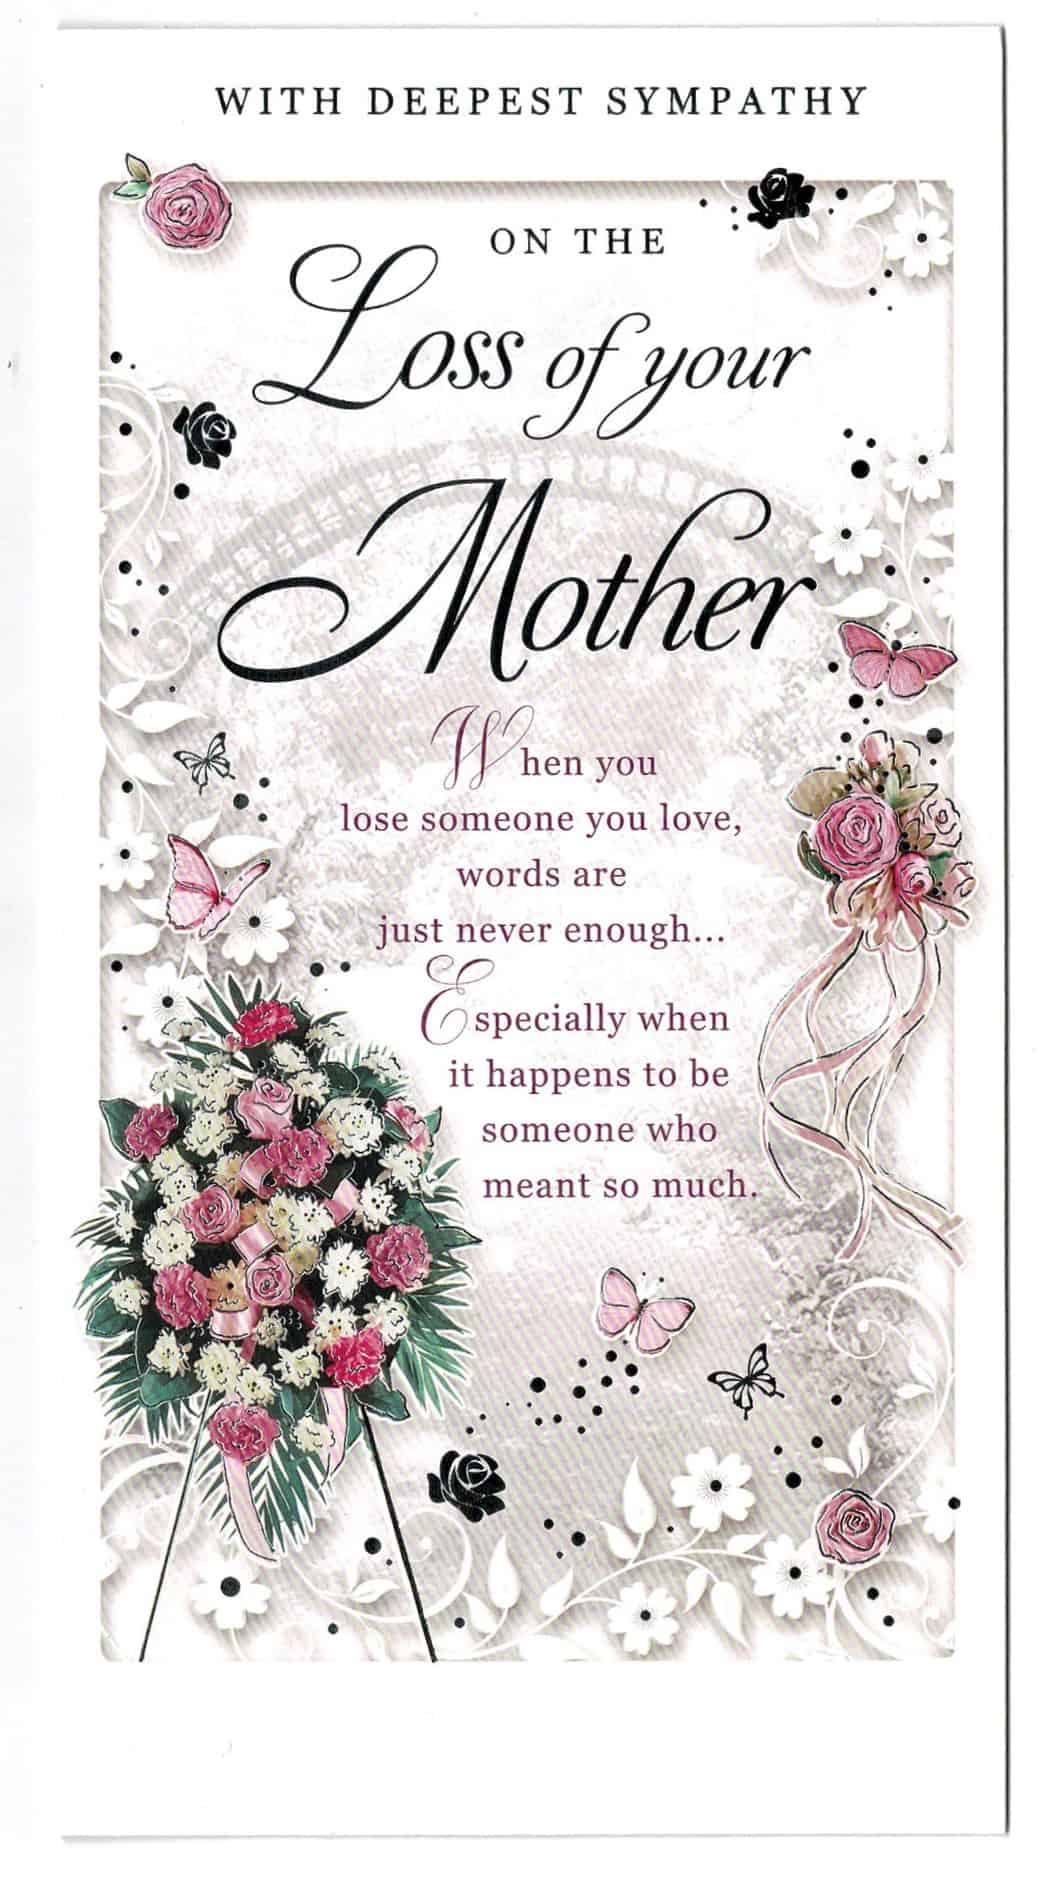 mother-sympathy-card-on-the-loss-of-your-mother-with-love-gifts-cards